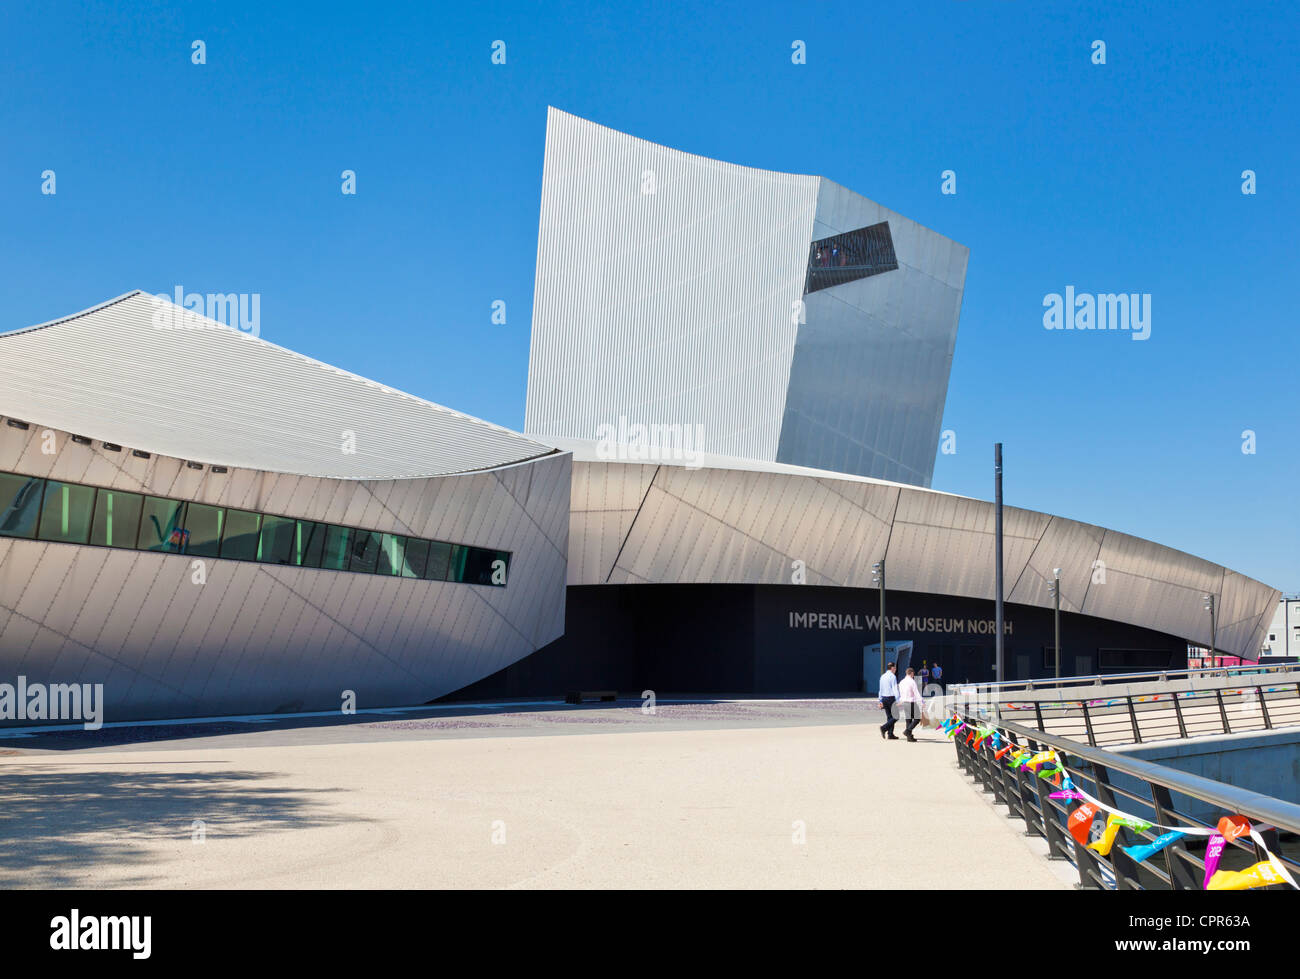 Imperial War Museum North Manchester Salford Quays angleterre GO UK EU Europe Banque D'Images